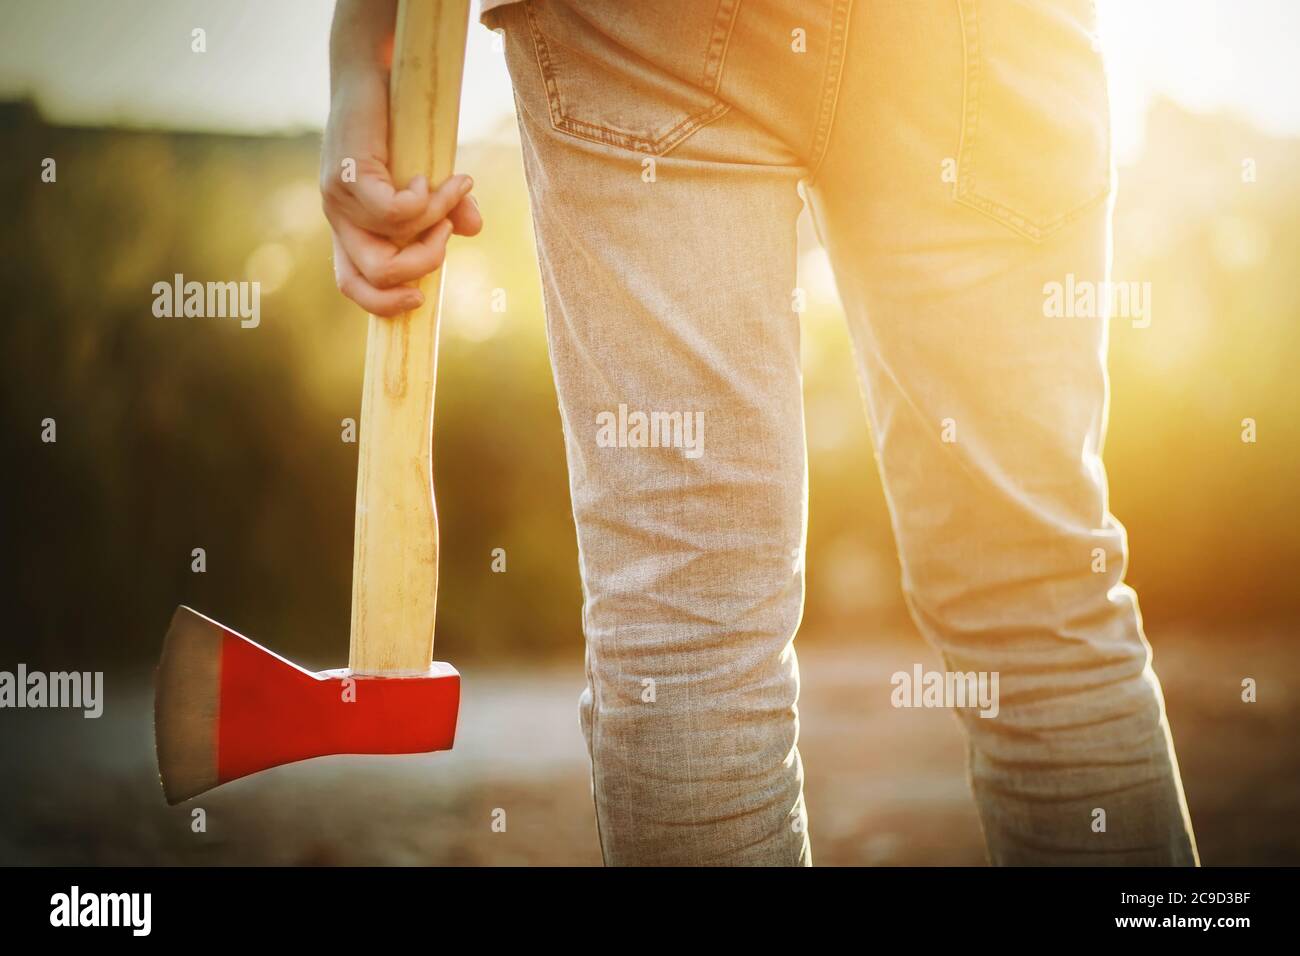 A woodcutter in jeans stands and holds in his hand his tool-an axe with a long handle and a red blade, illuminated by sunlight on a warm summer day. Stock Photo